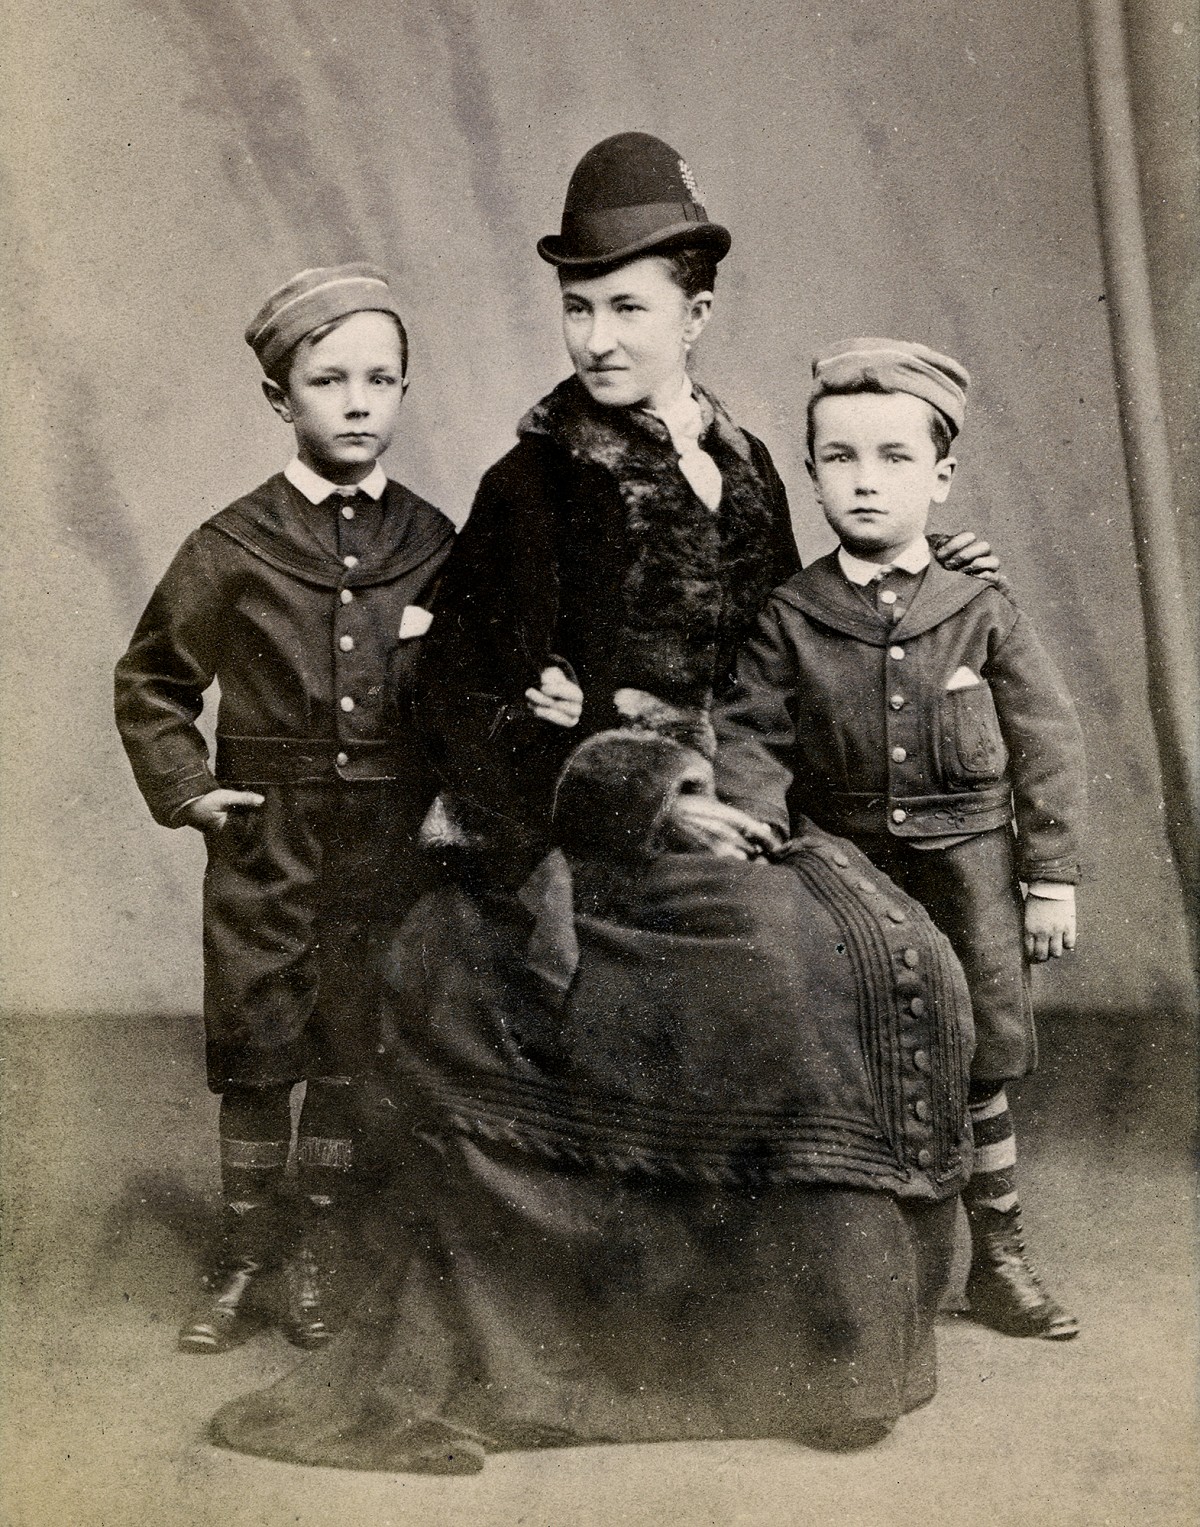 Family from the Playfair family album by D. Milne, Blairgowrie c1865-84